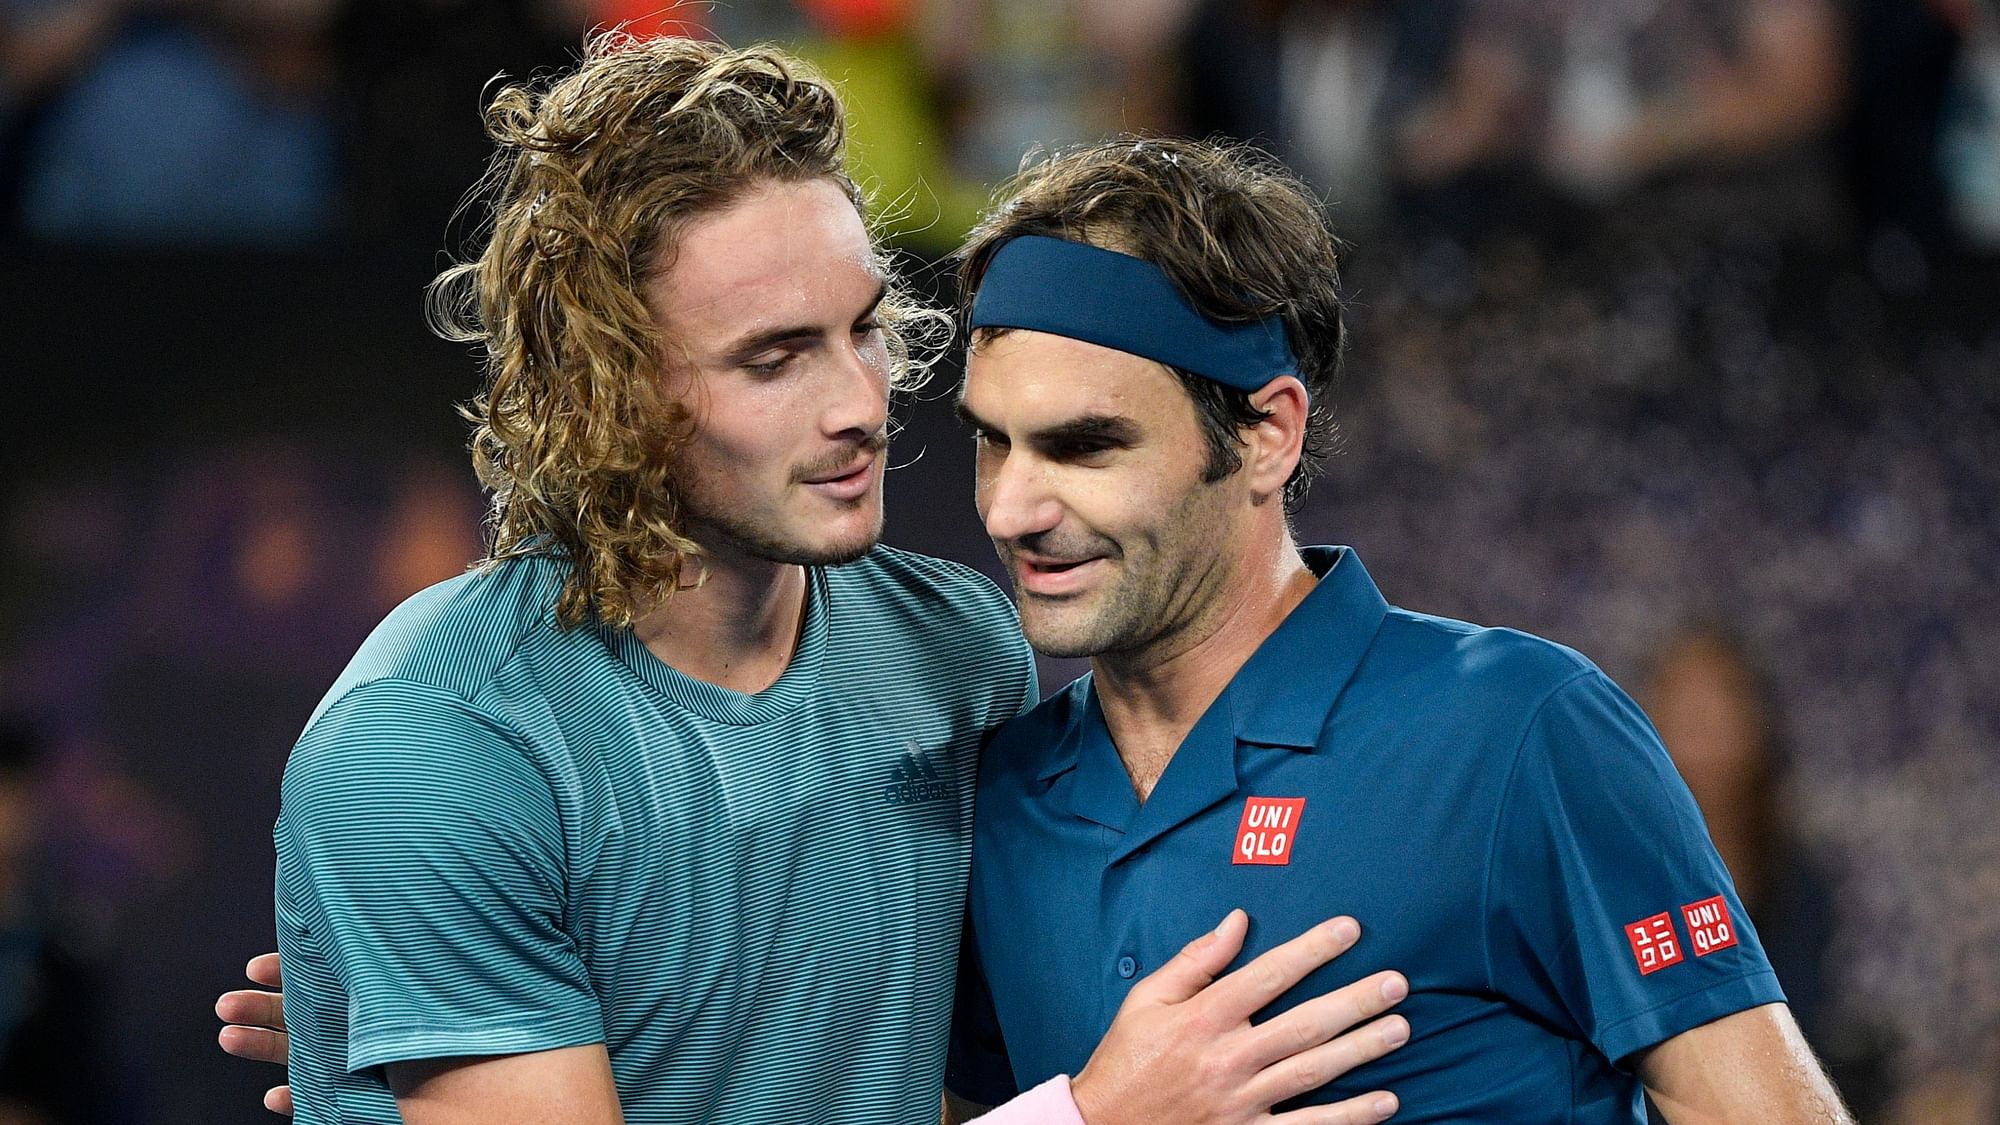 Greece’s Stefanos Tsitsipas, left, is congratulated by Switzerland’s Roger Federer after winning their fourth round match at the Australian Open.